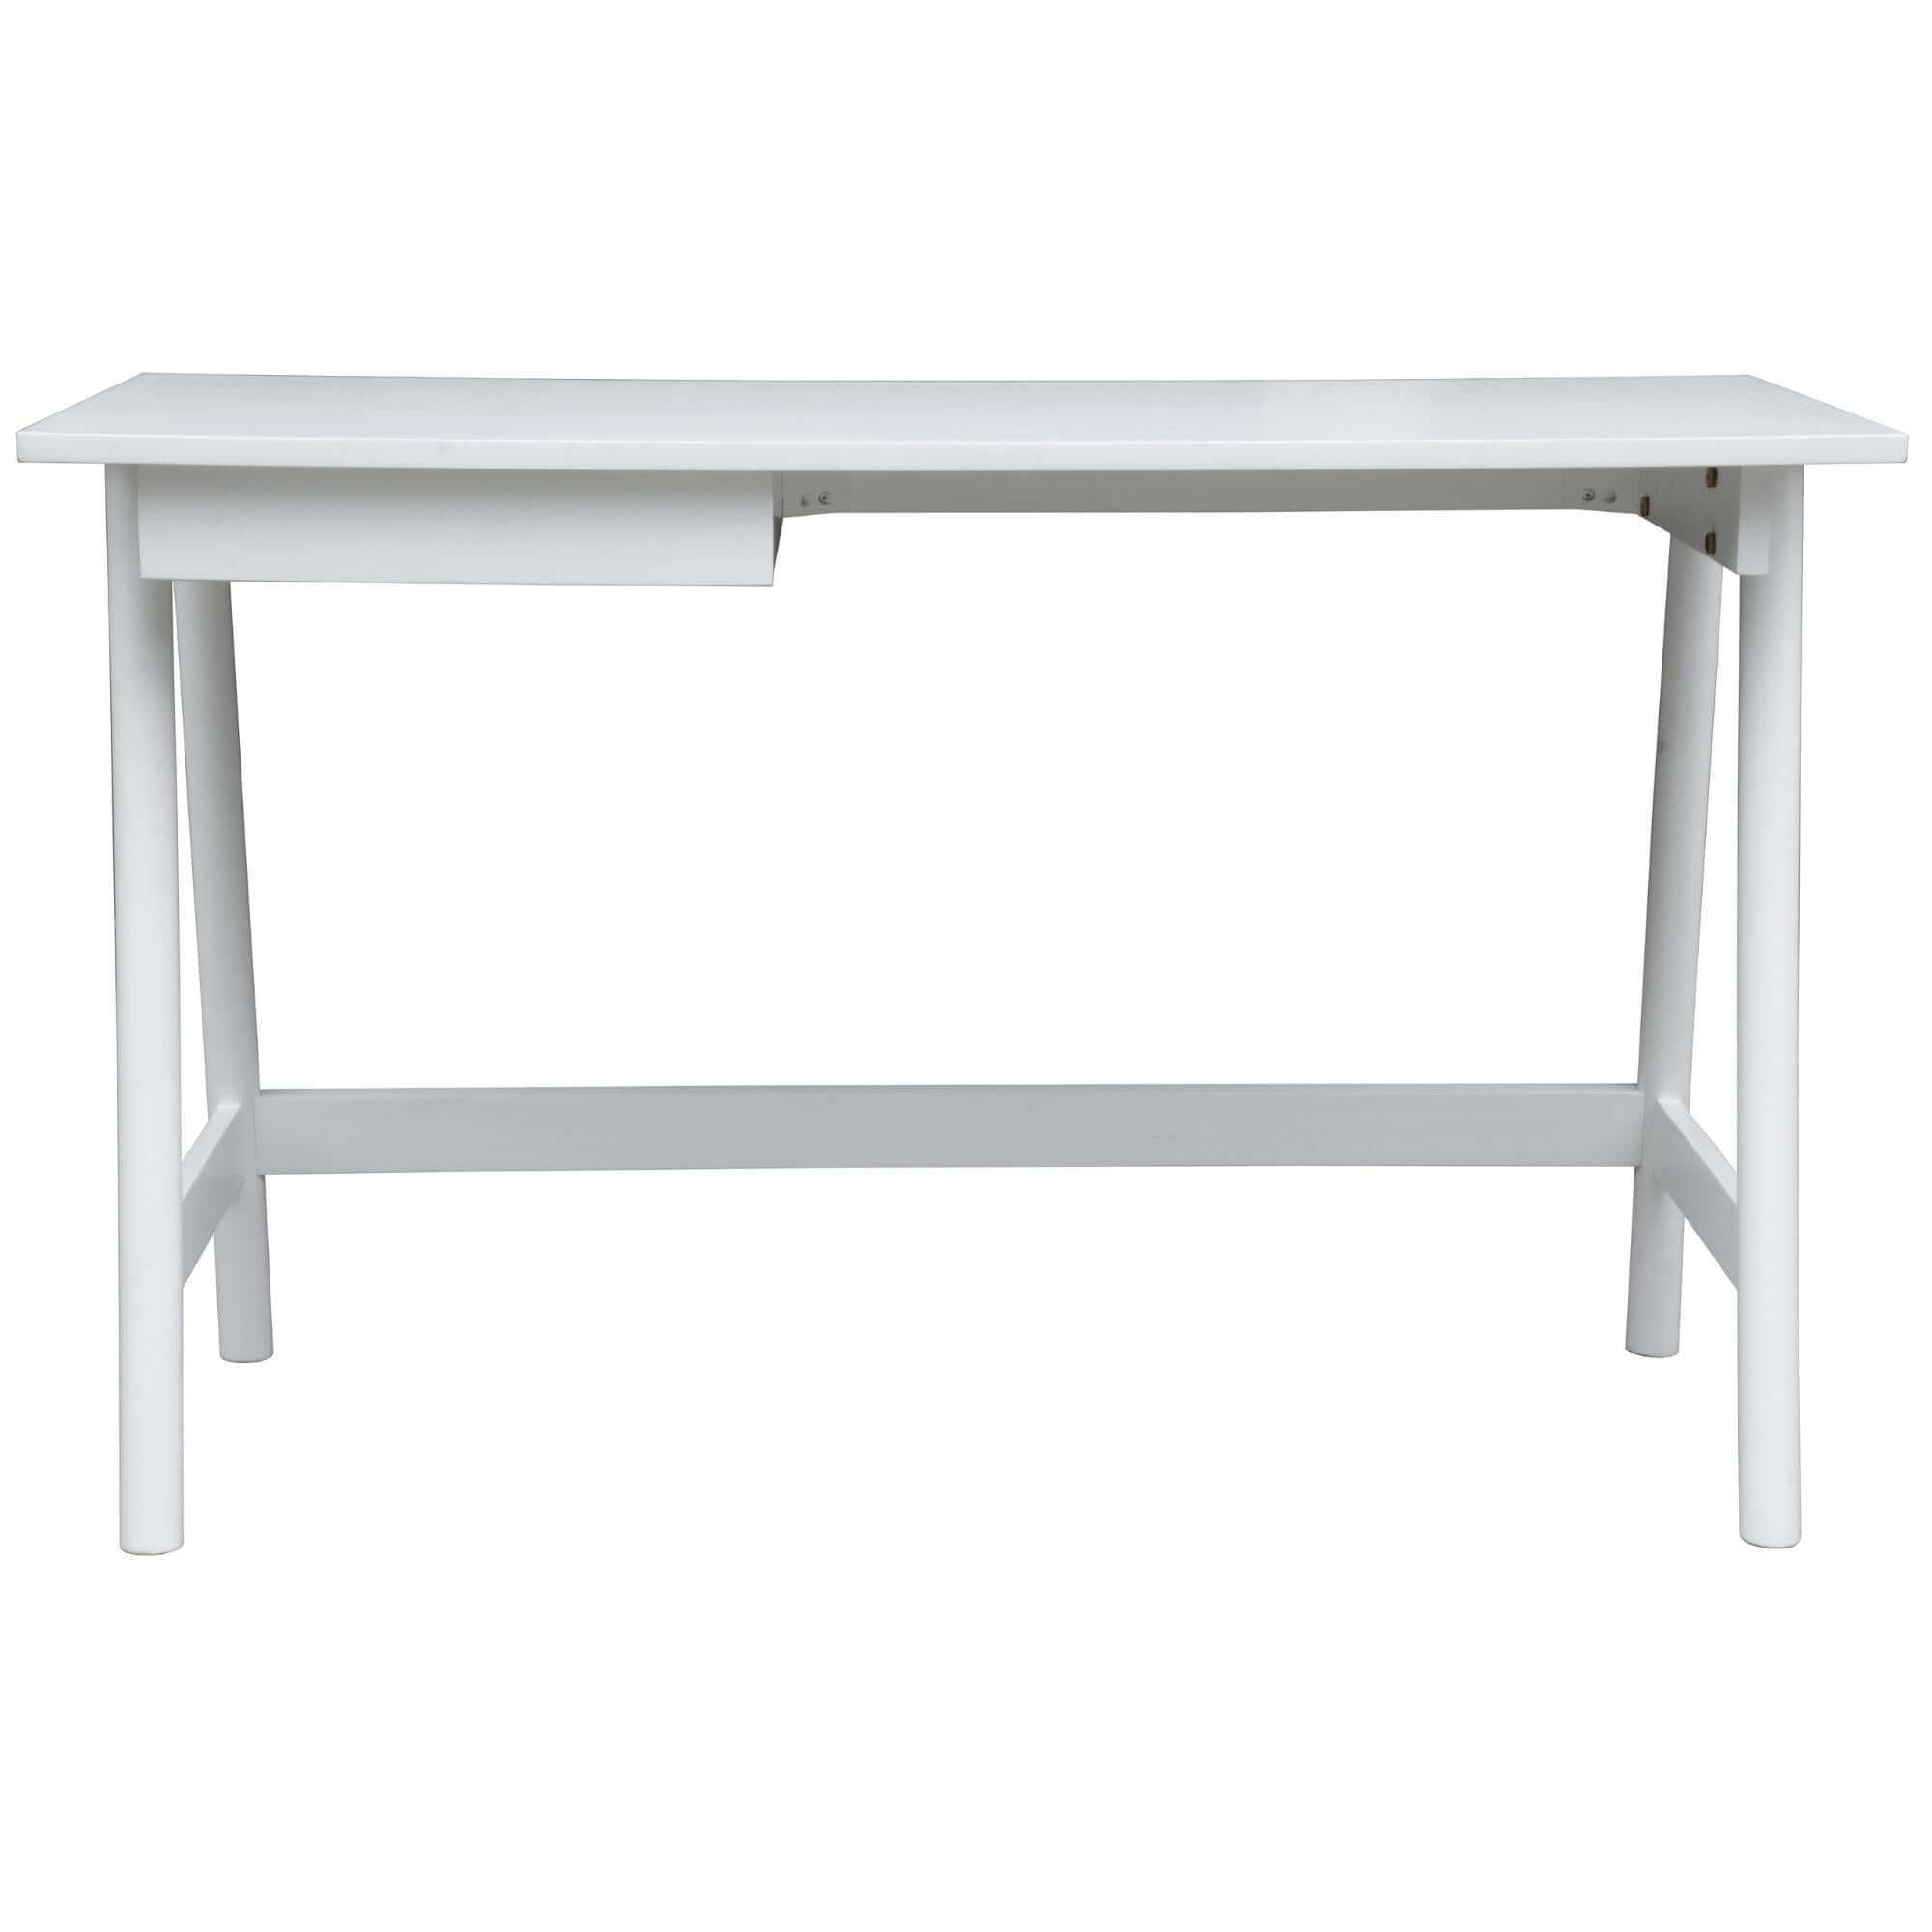 Mindil Office Desk Student Study Table Solid Wooden Timber Frame - White-Upinteriors